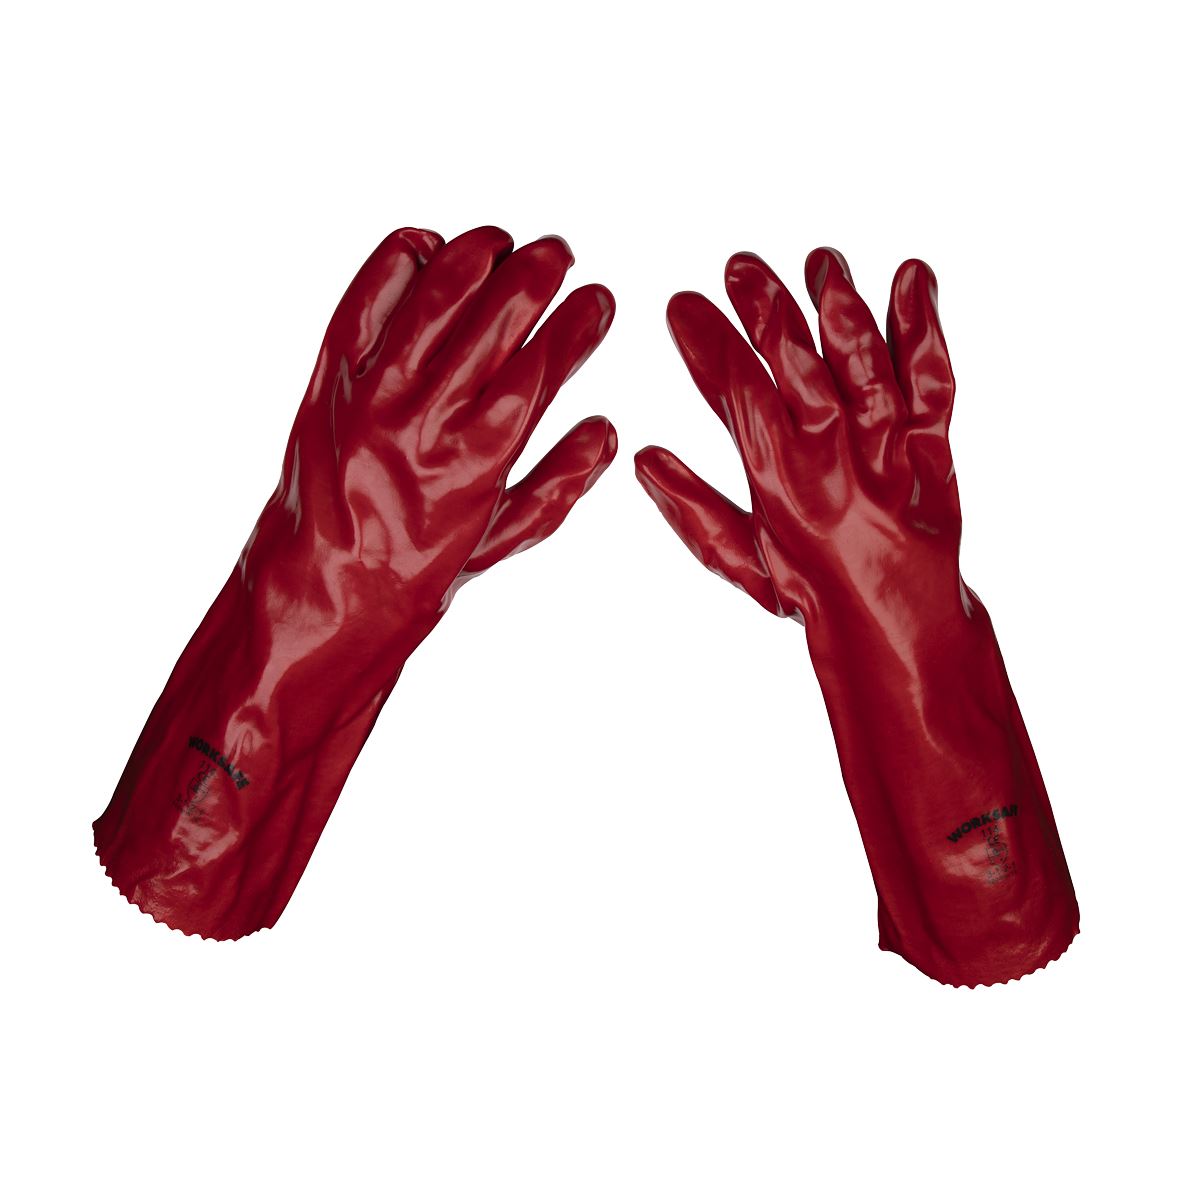 Worksafe by Sealey Red PVC Gauntlets 450mm - Pack of 12 Pairs